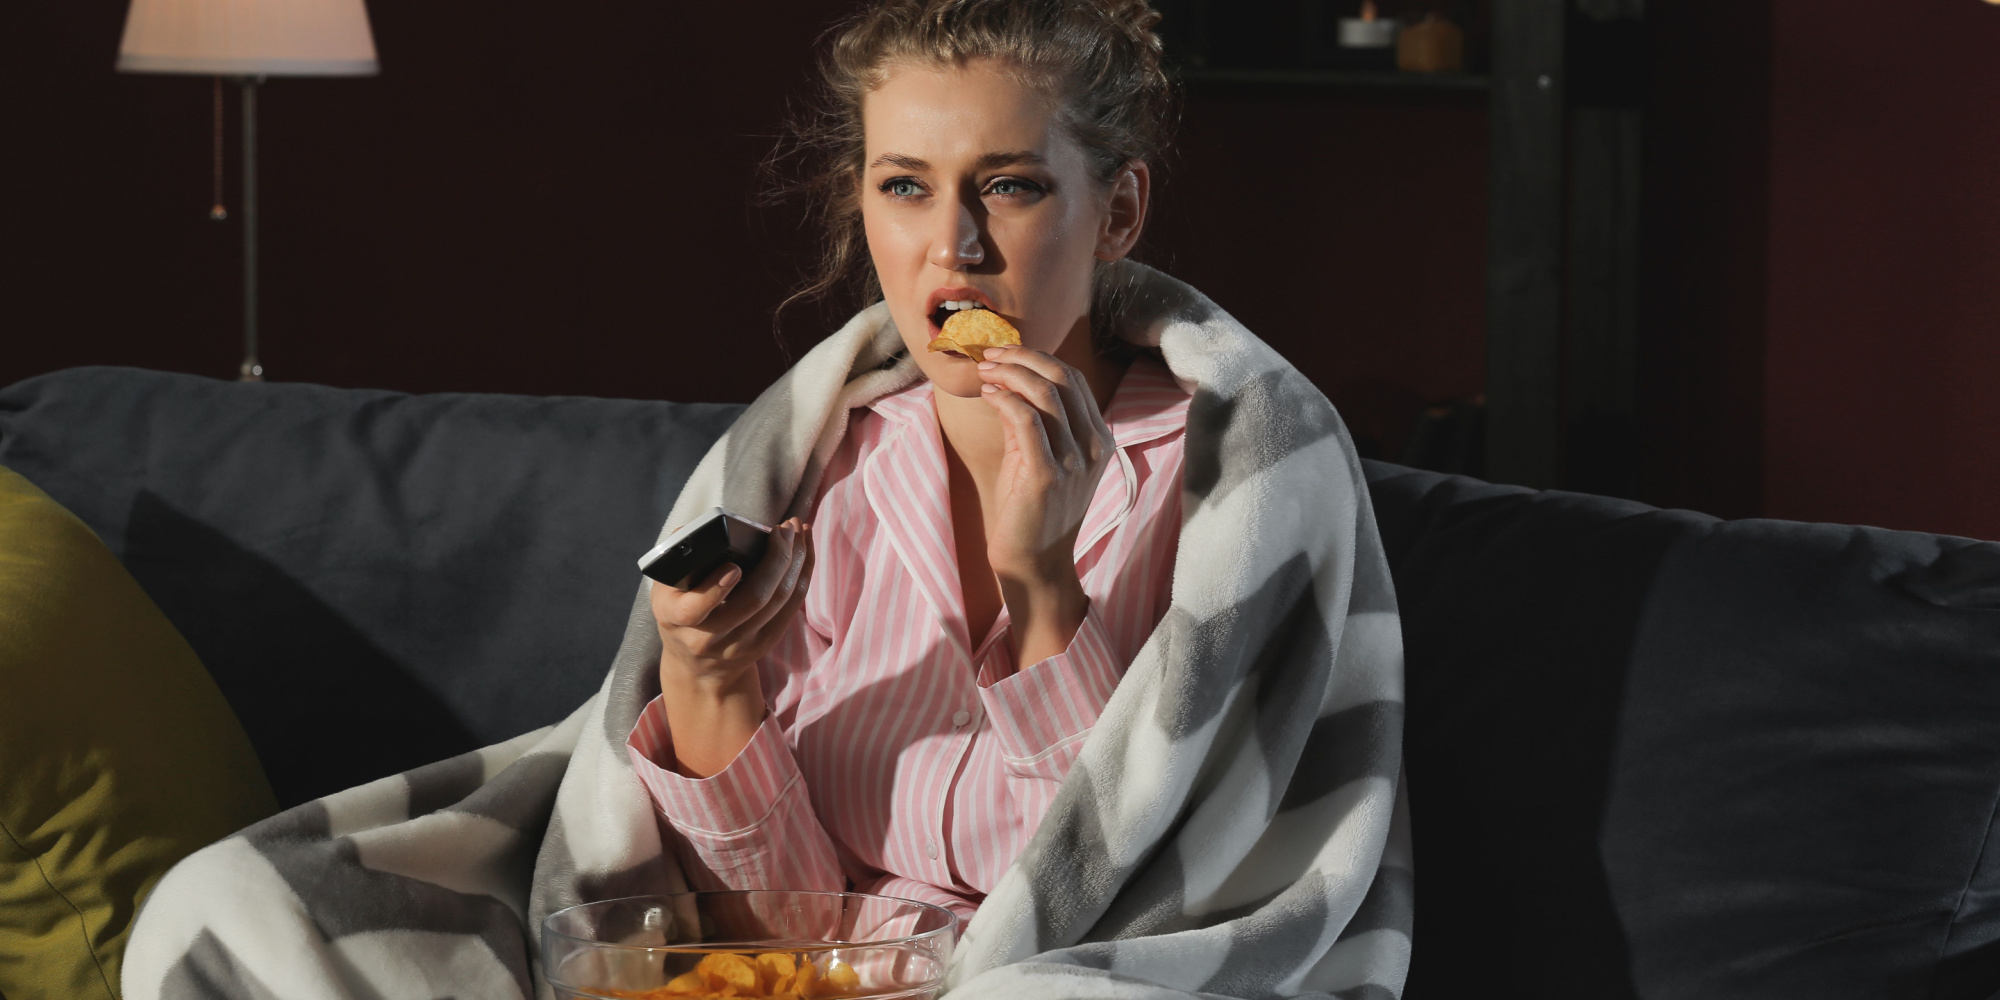 How to Avoid Eating Junk Food at Night